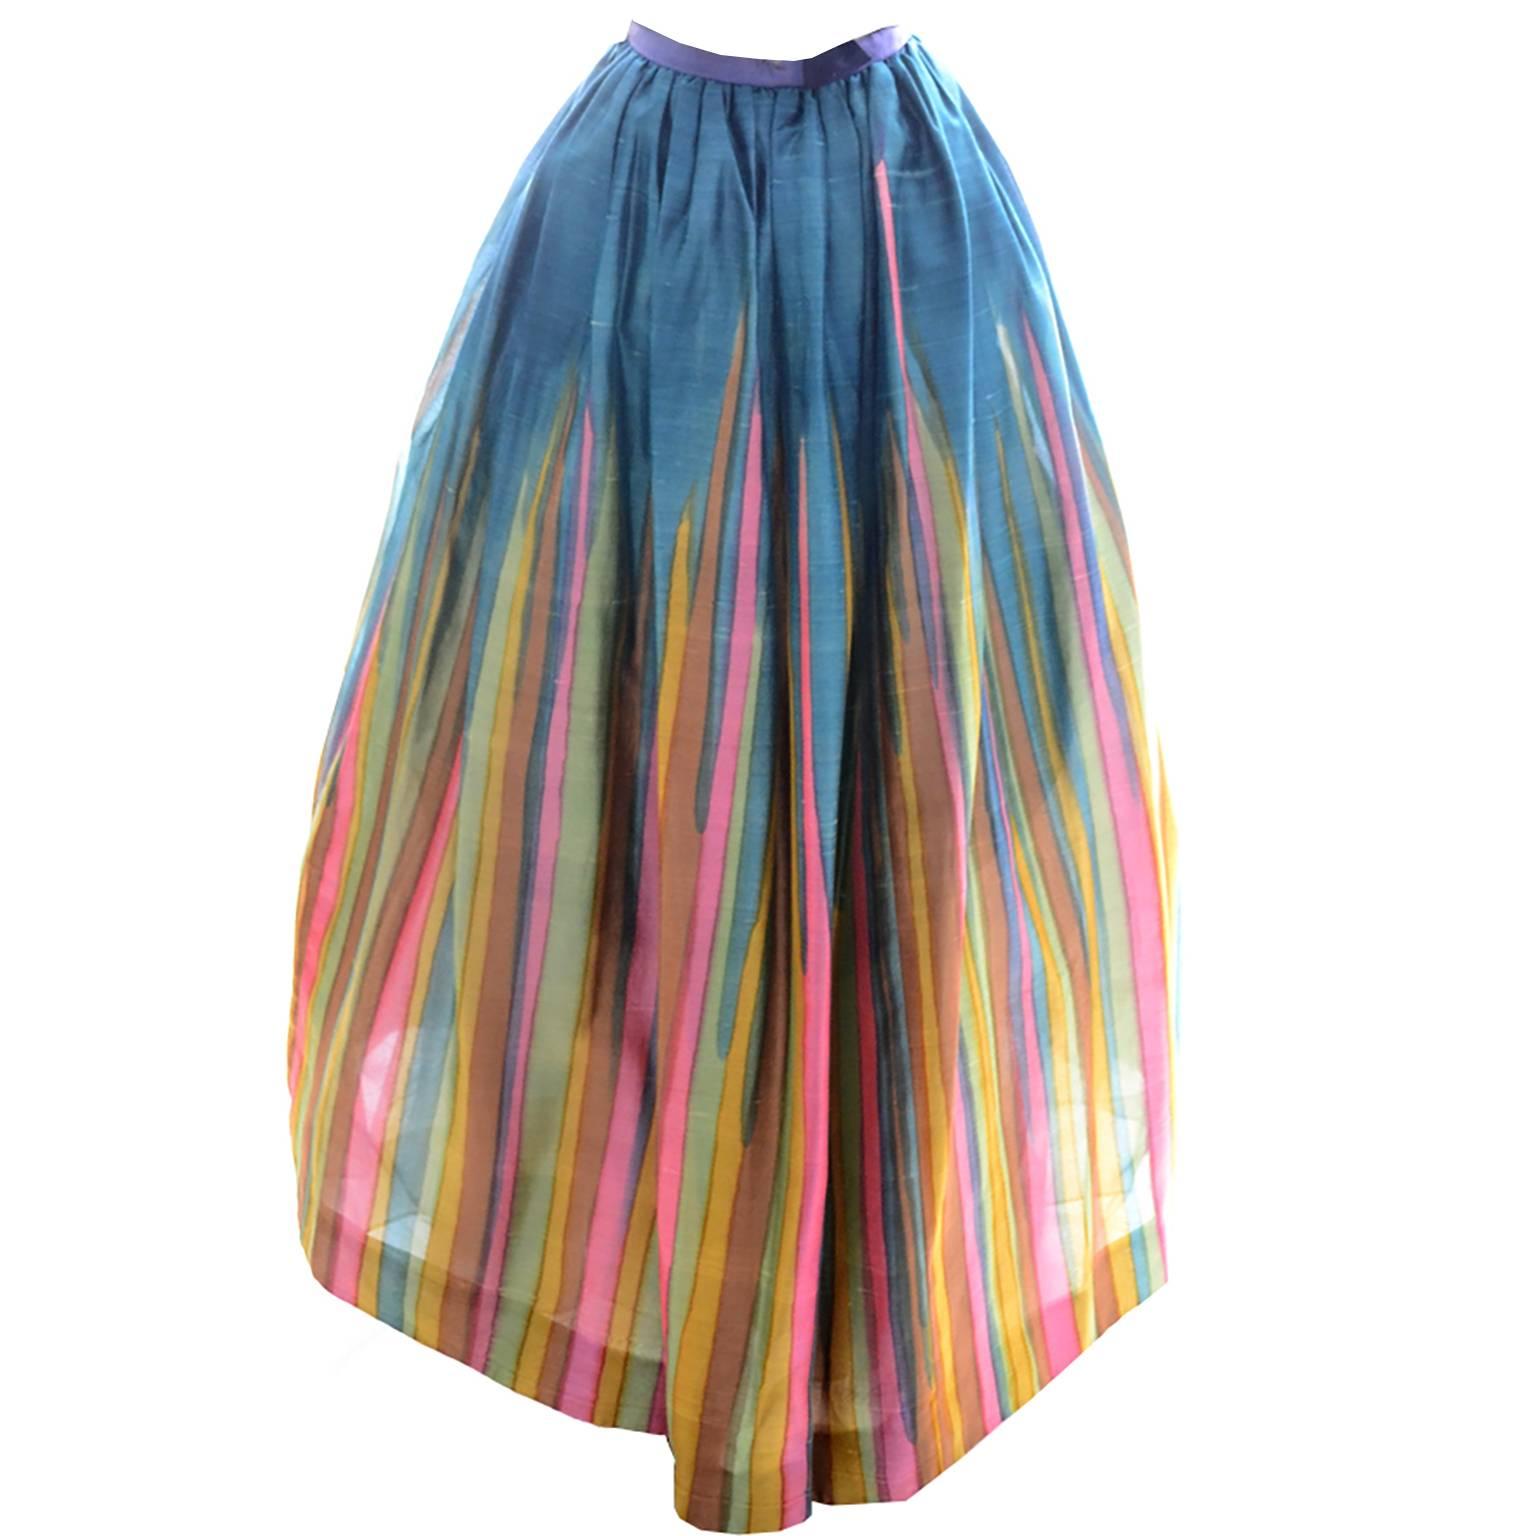 This outstanding vintage full length silk skirt is from an estate of nothing but exceptional designer vintage clothing from the 1940's through the 1970's.  The woman who owned the clothing hardly if ever wore anything she owned and her closets read